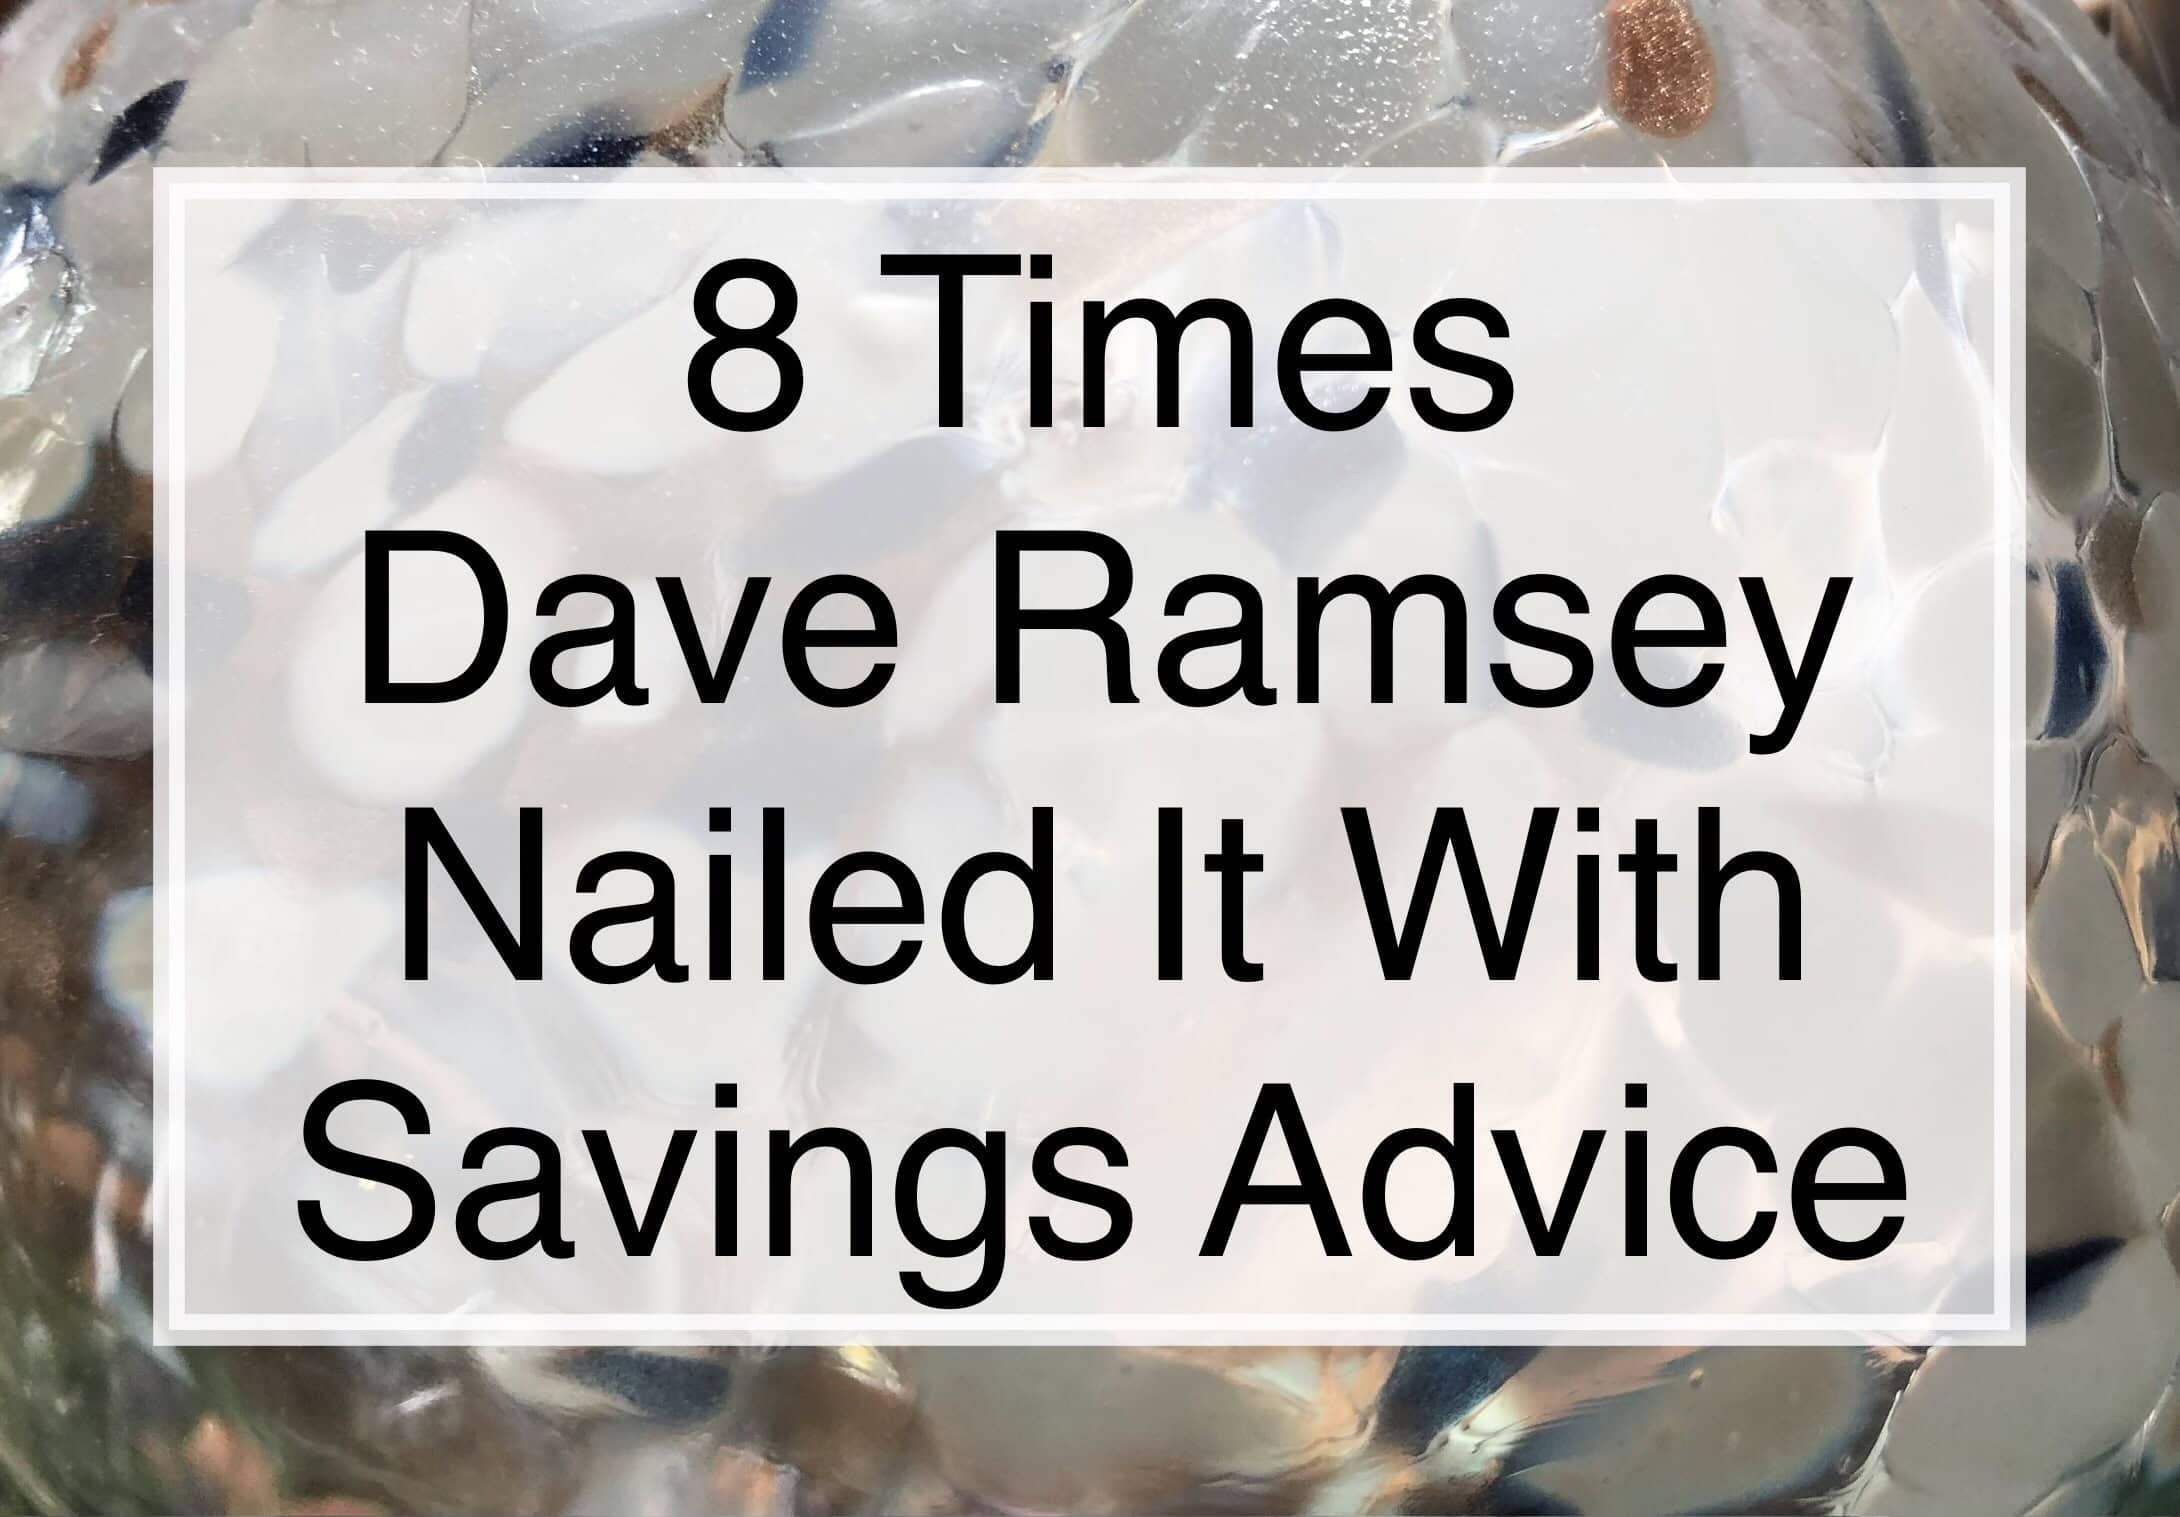 8 Times Dave Ramsey Nailed It With Savings Advice